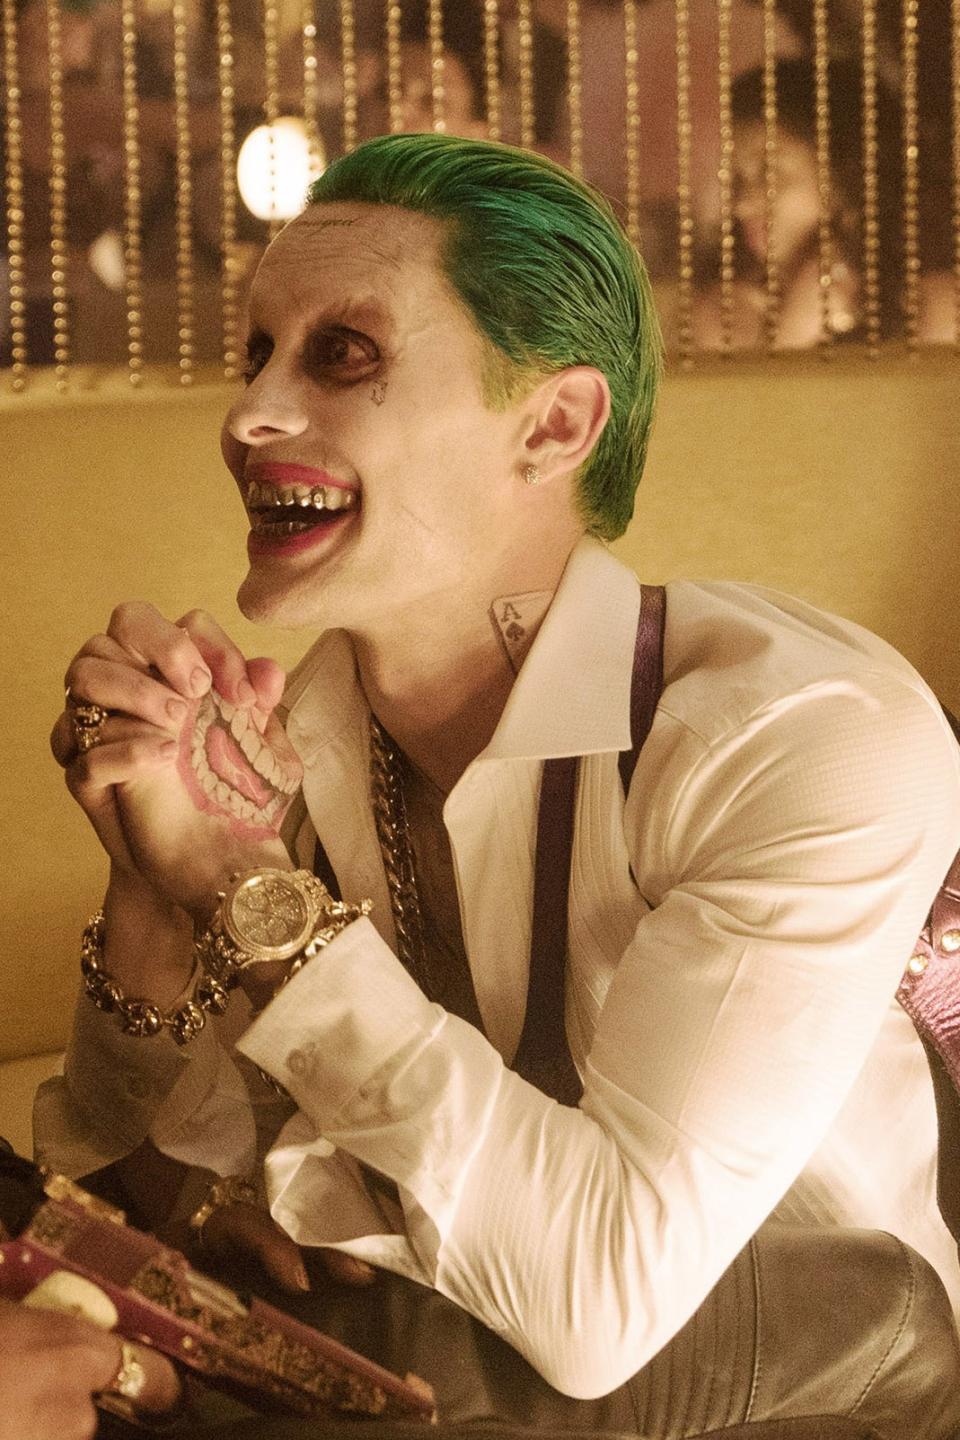 Jared in character as the Joker